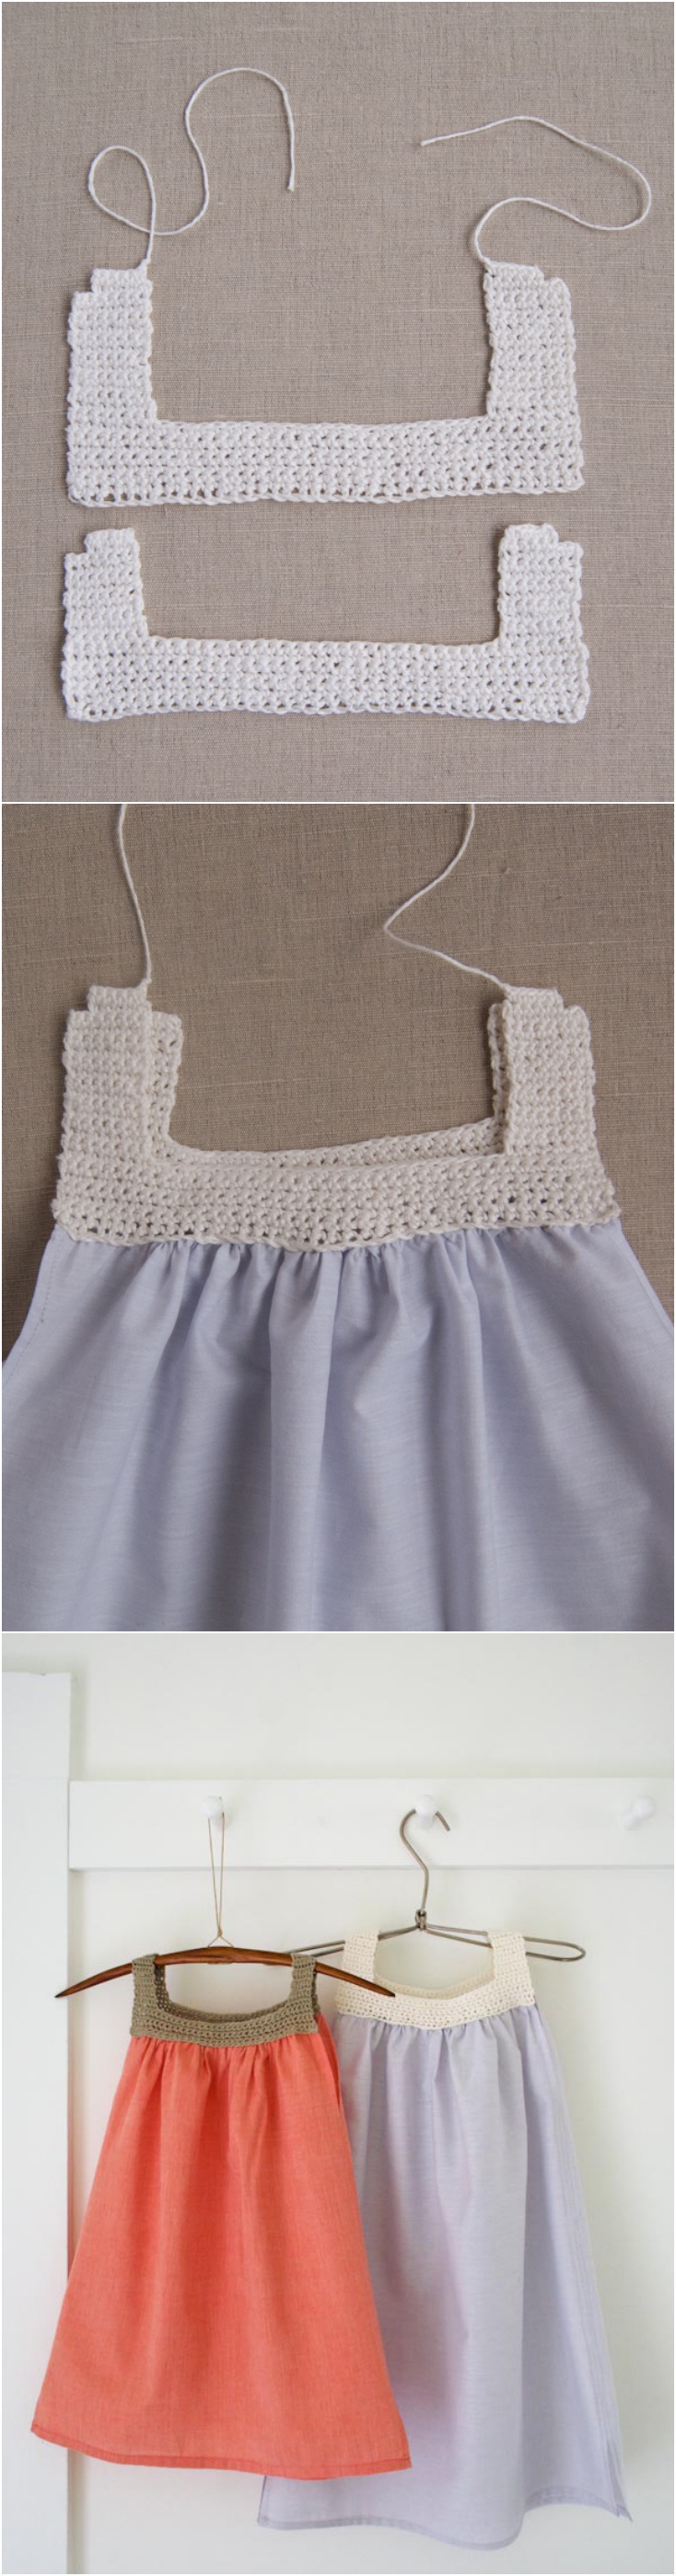 sweet crochet and sew dress with free pattern